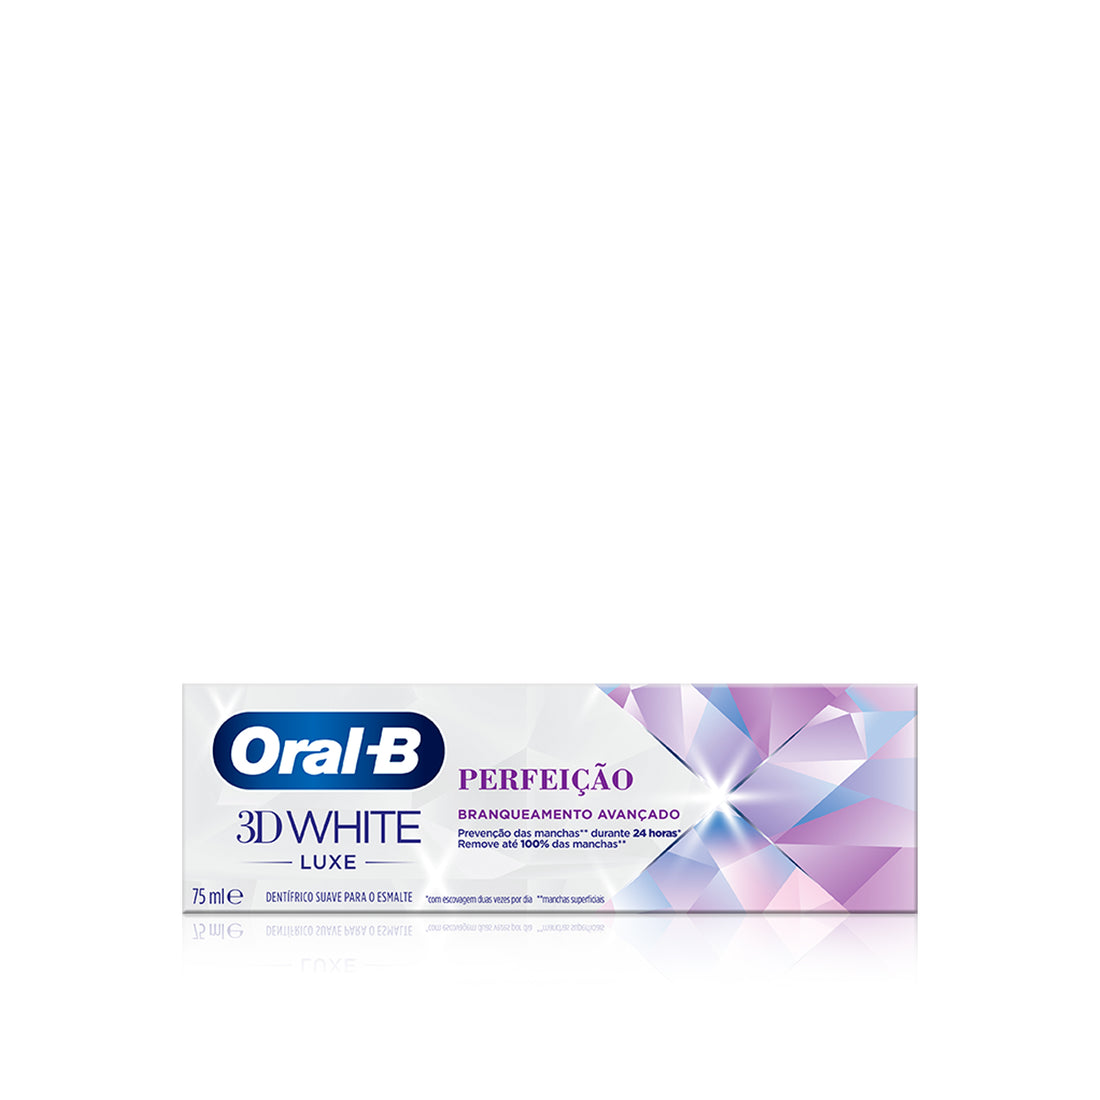 Oral-B 3D White Luxe Perfection Dentifrica Paste 75 Ml